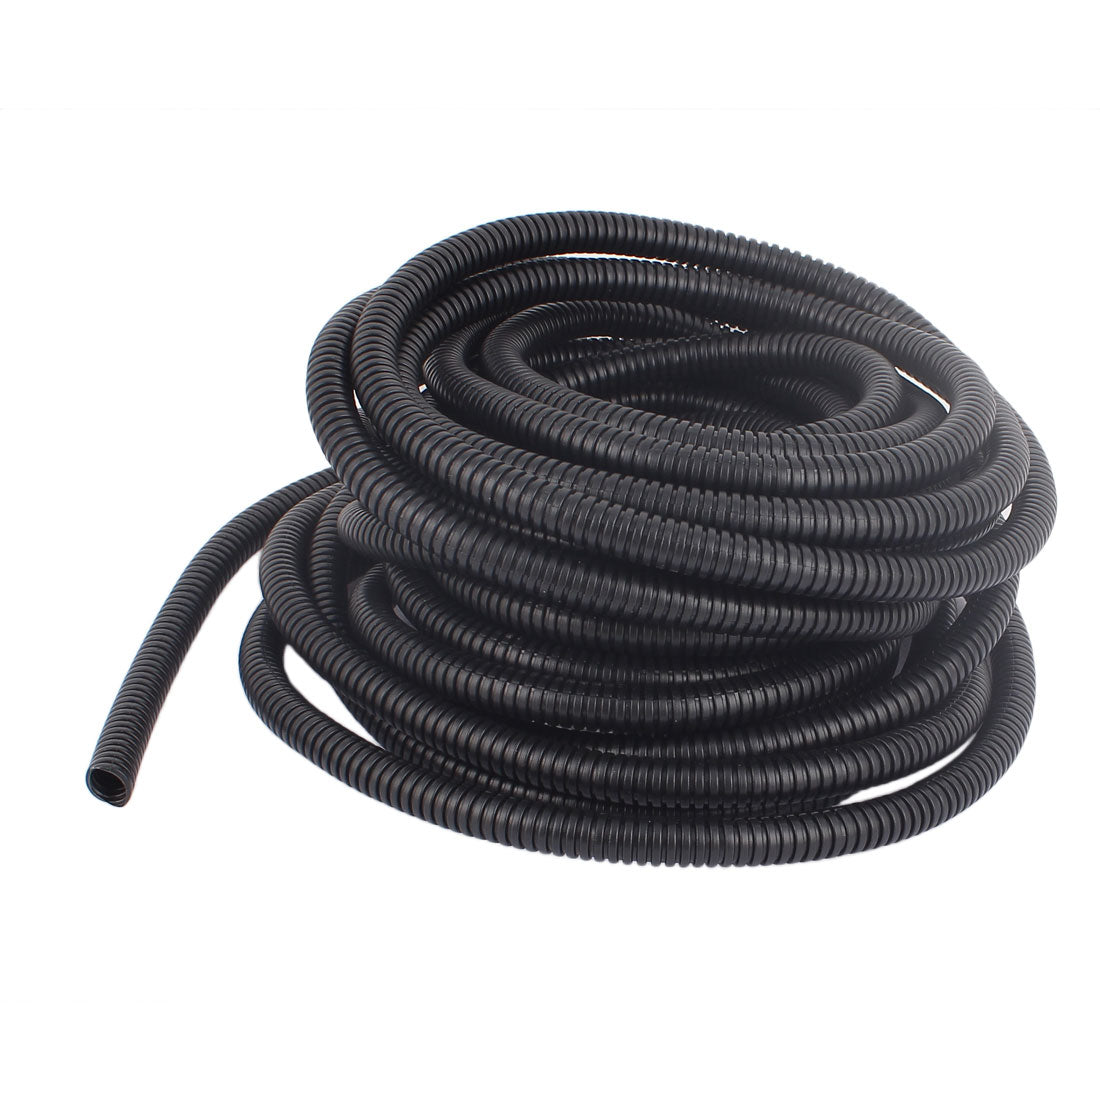 uxcell Uxcell 11 M 10 x 13 mm PVC Flexible Corrugated Conduit Tube for Garden,Office Black